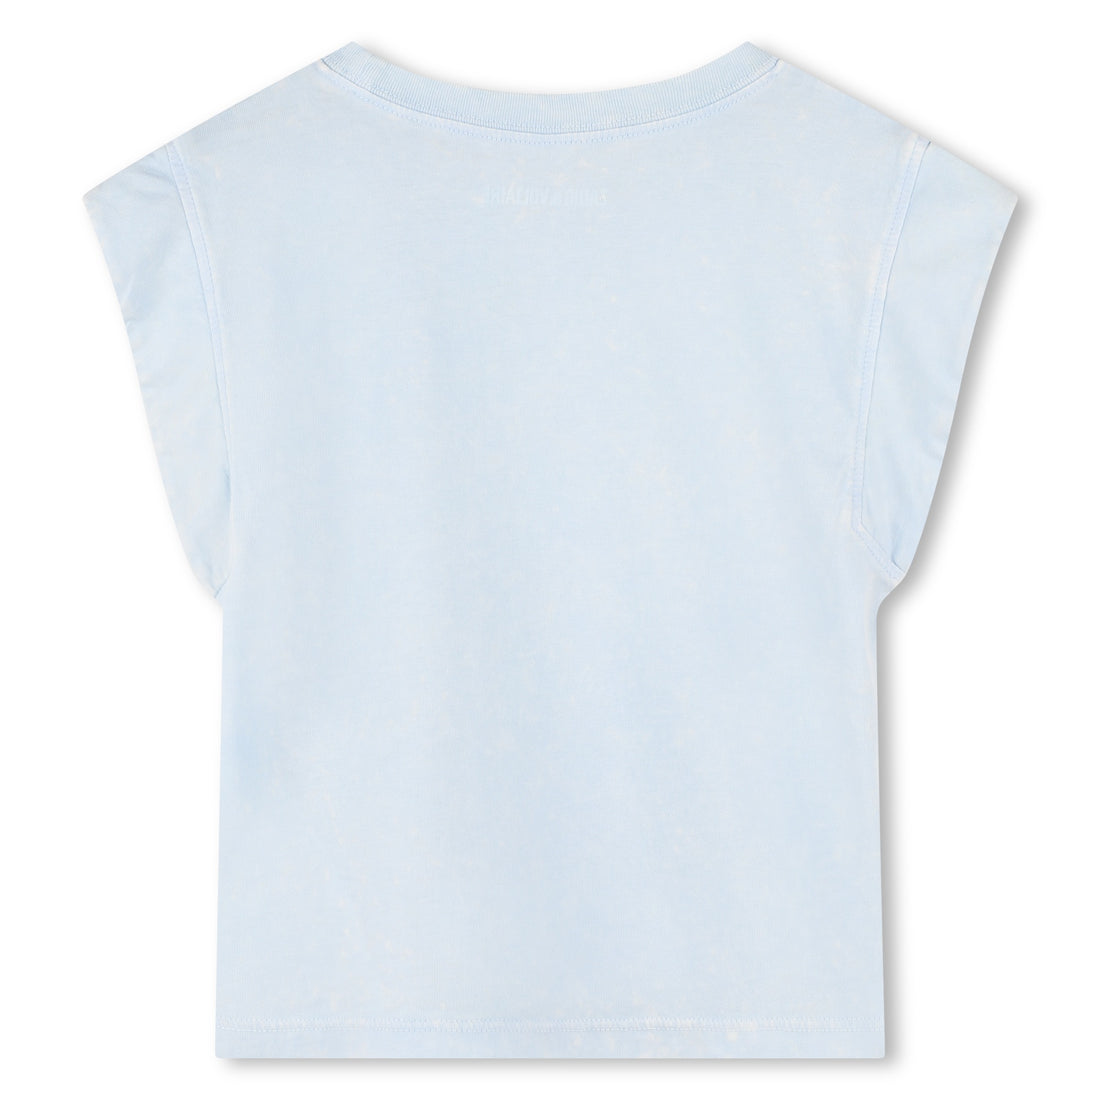 Tee-Shirt Ice berg Fille Zadig & Voltaire E24